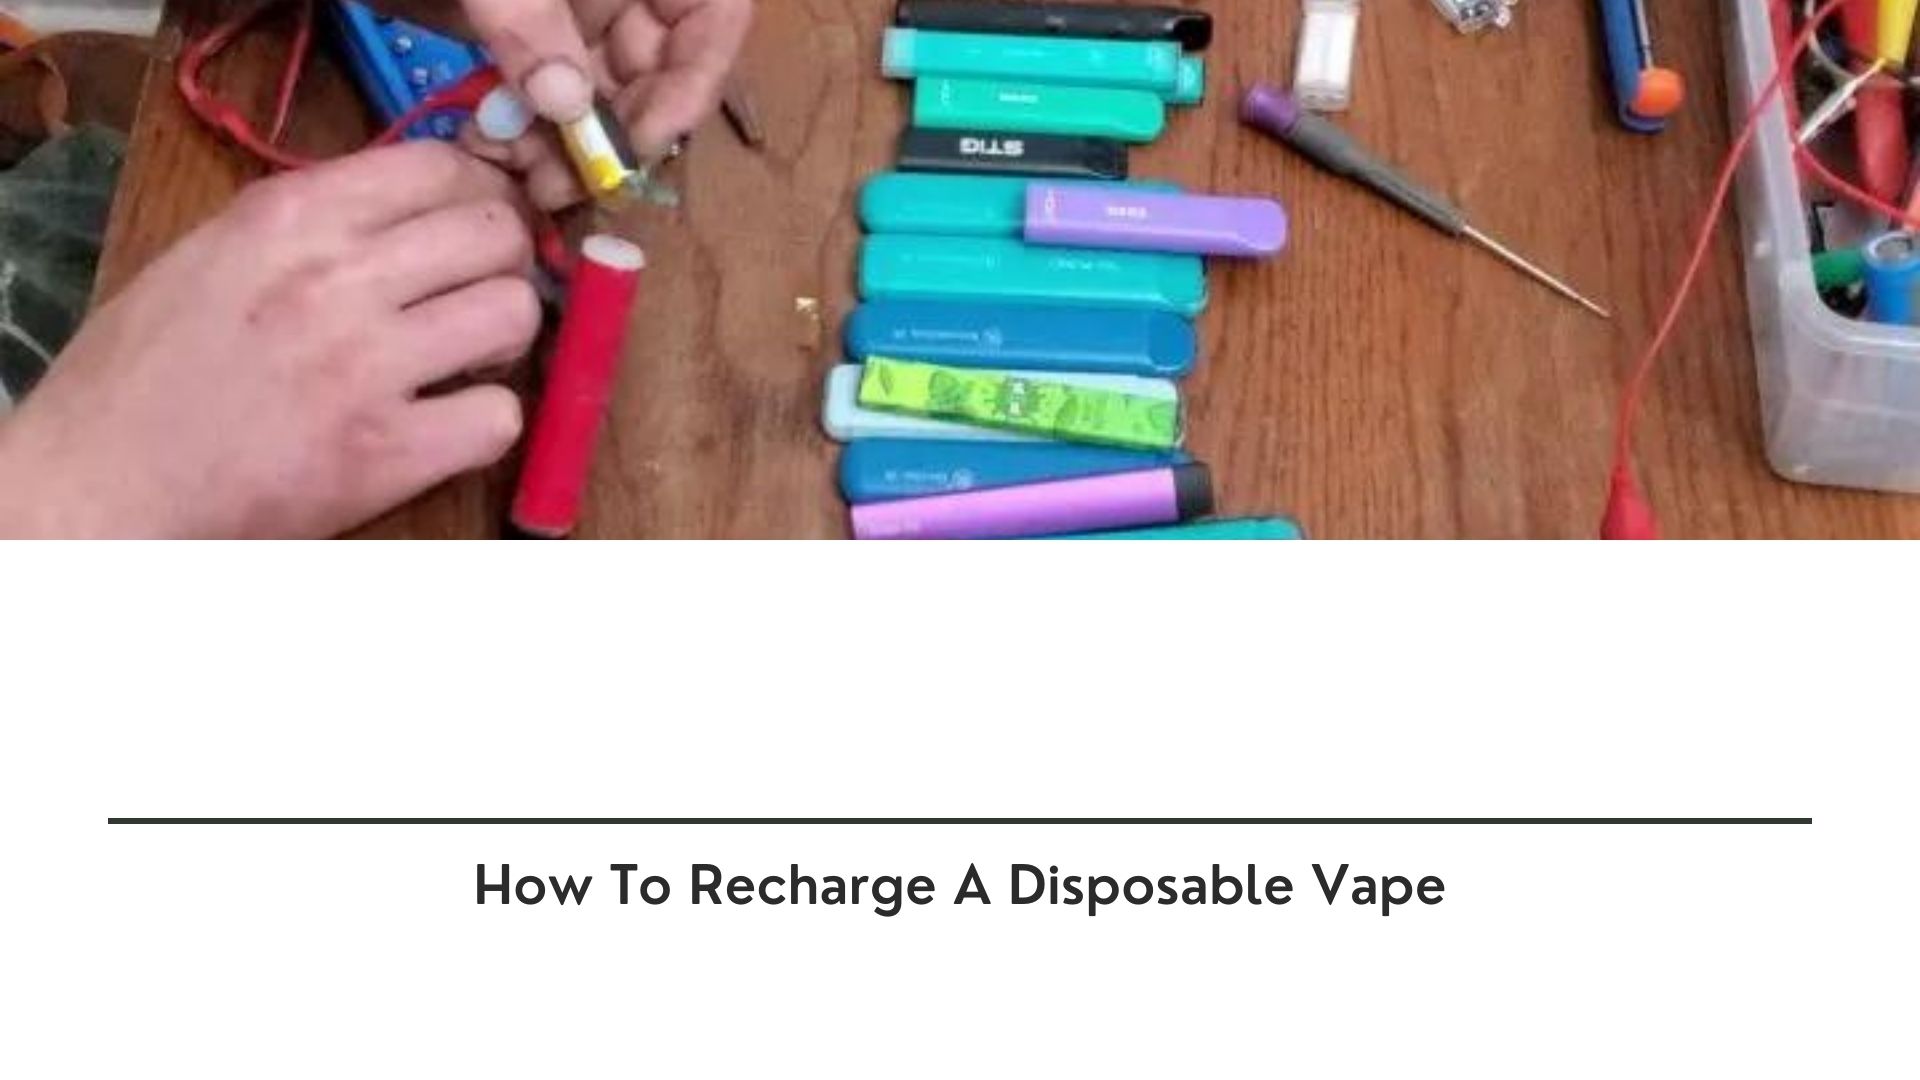 How To Recharge A Disposable Vape- Know All The Steps